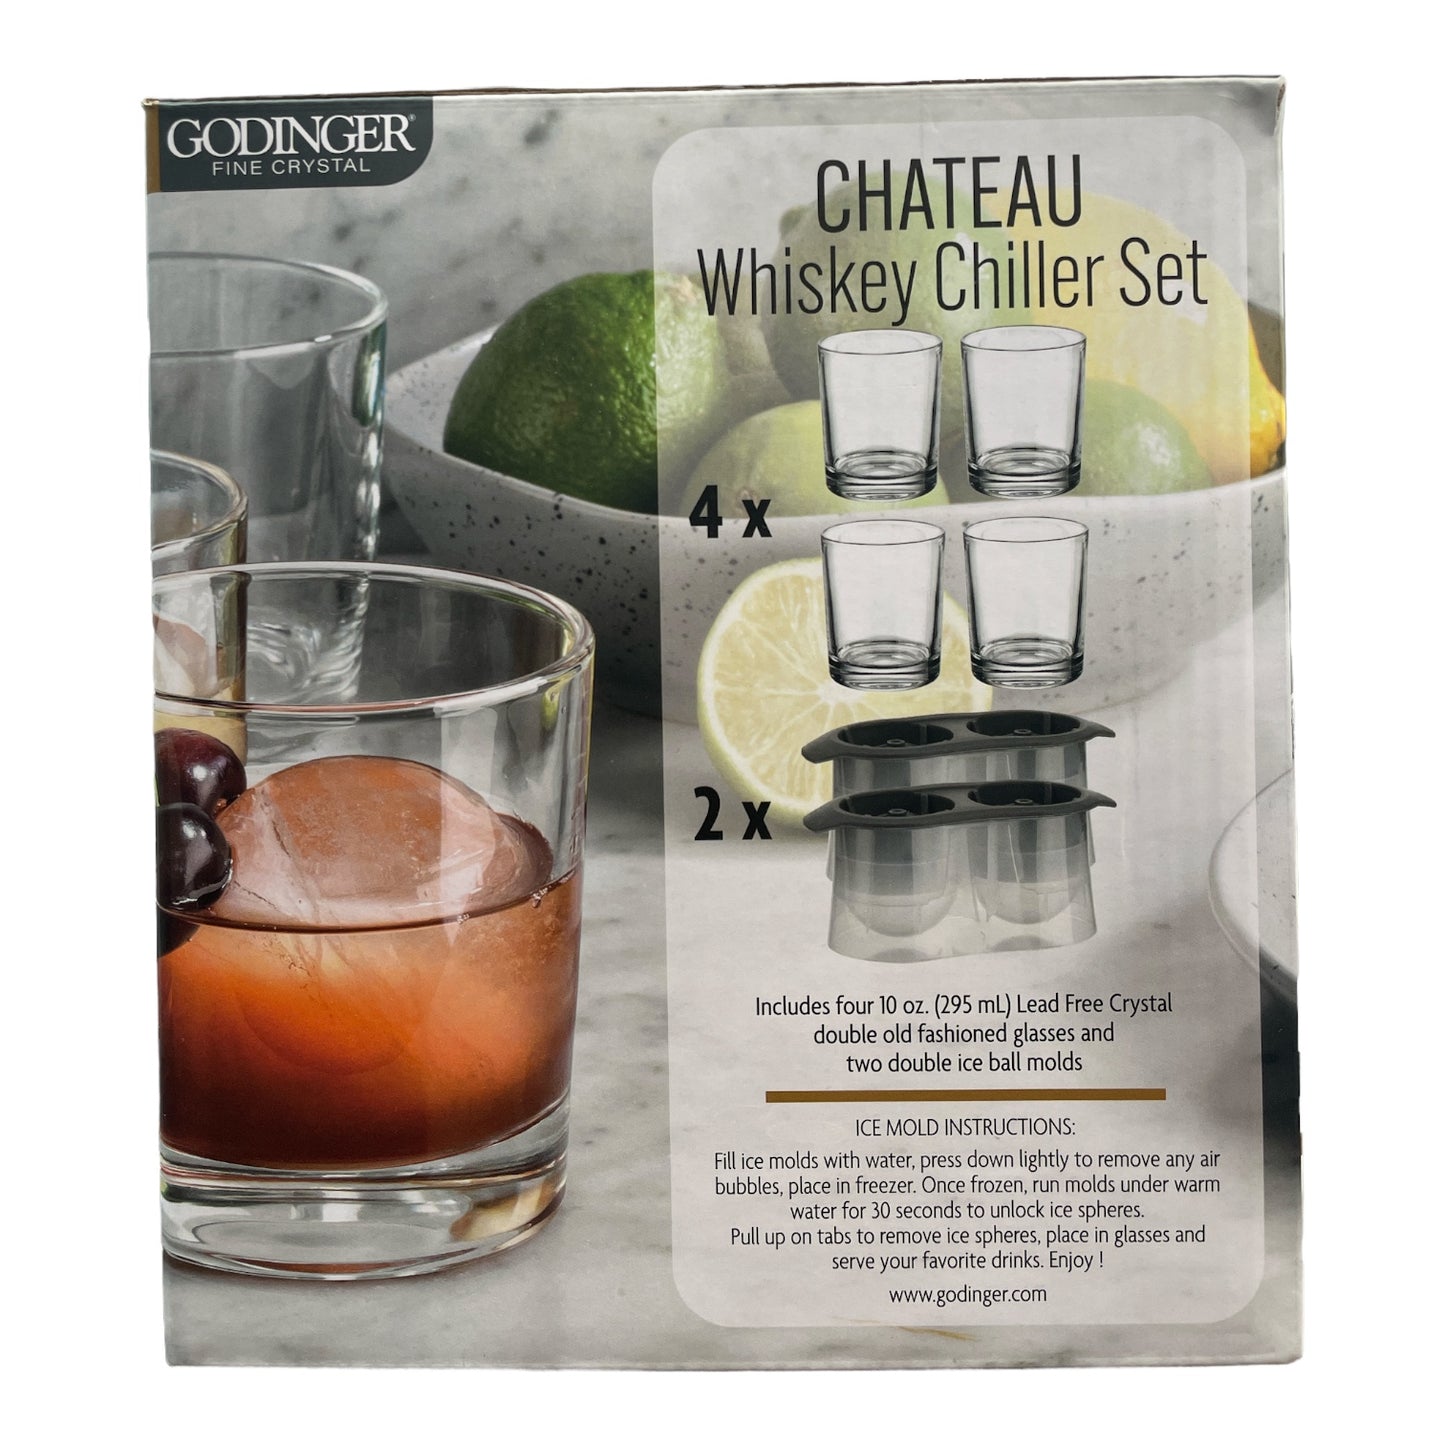 Godinger Fine Crystal Chateau Whiskey Chiller Set with Ice Mold (10oz, 6 Pieces)